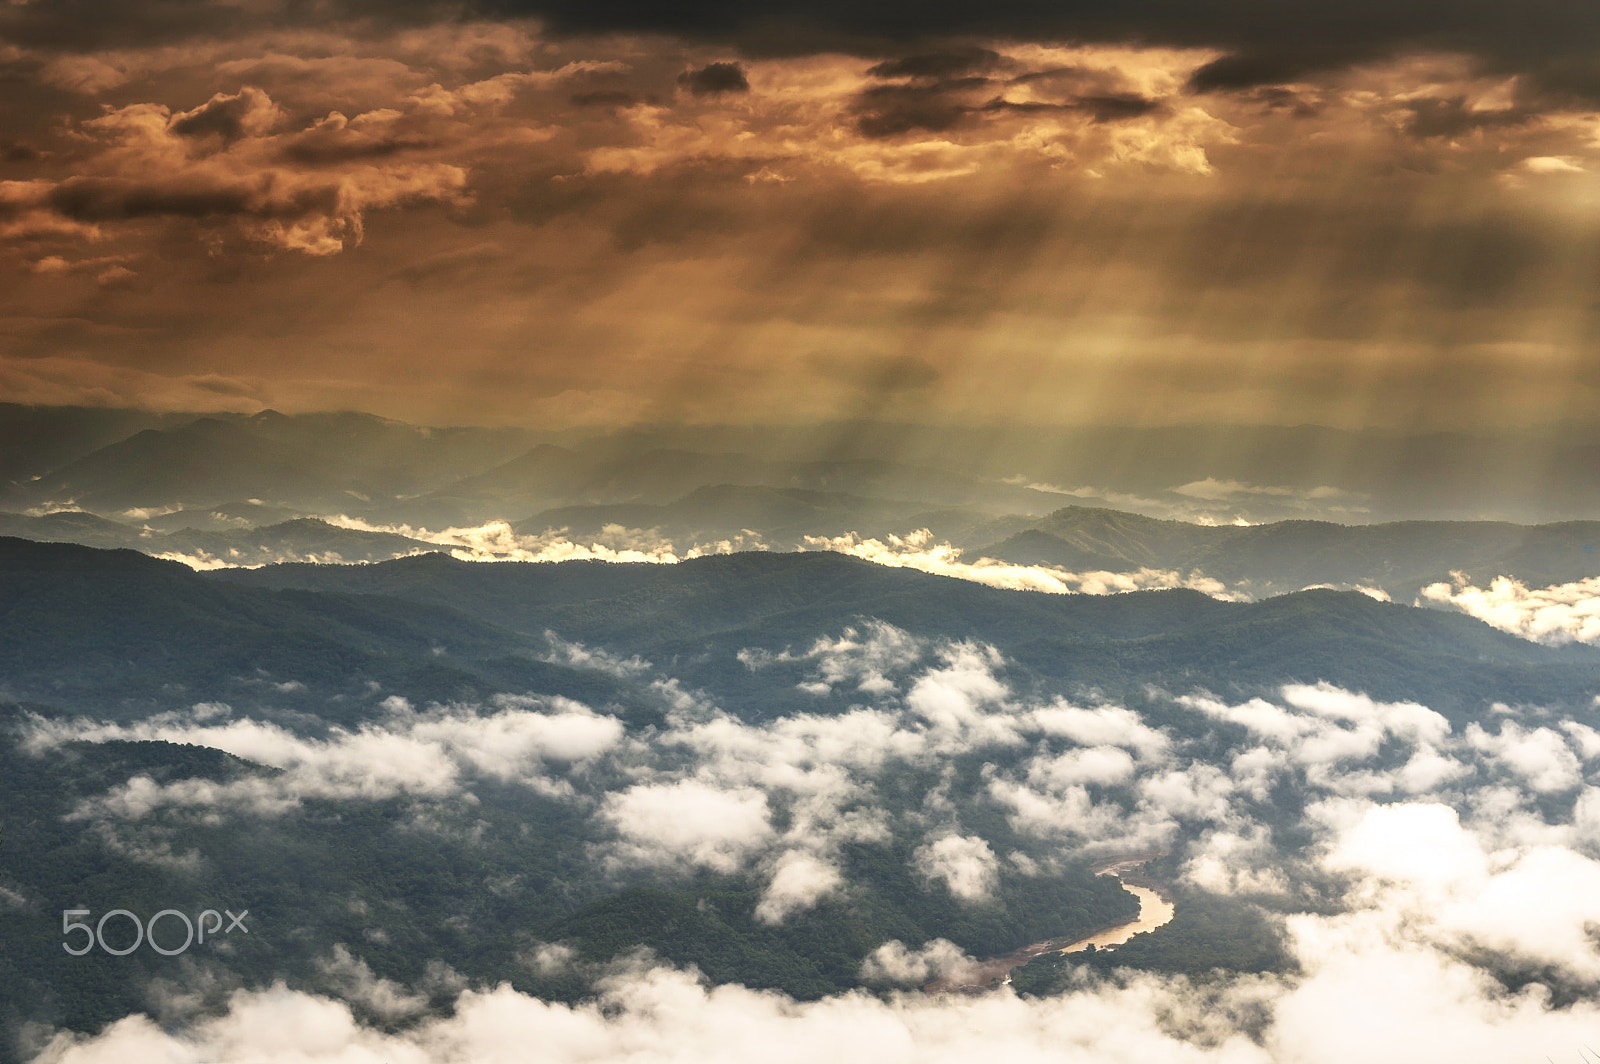 Pentax K-3 II + Sigma 17-70mm F2.8-4 DC Macro HSM | C sample photo. Fantastic landscape of sun ray from the sun over the mountain wh photography